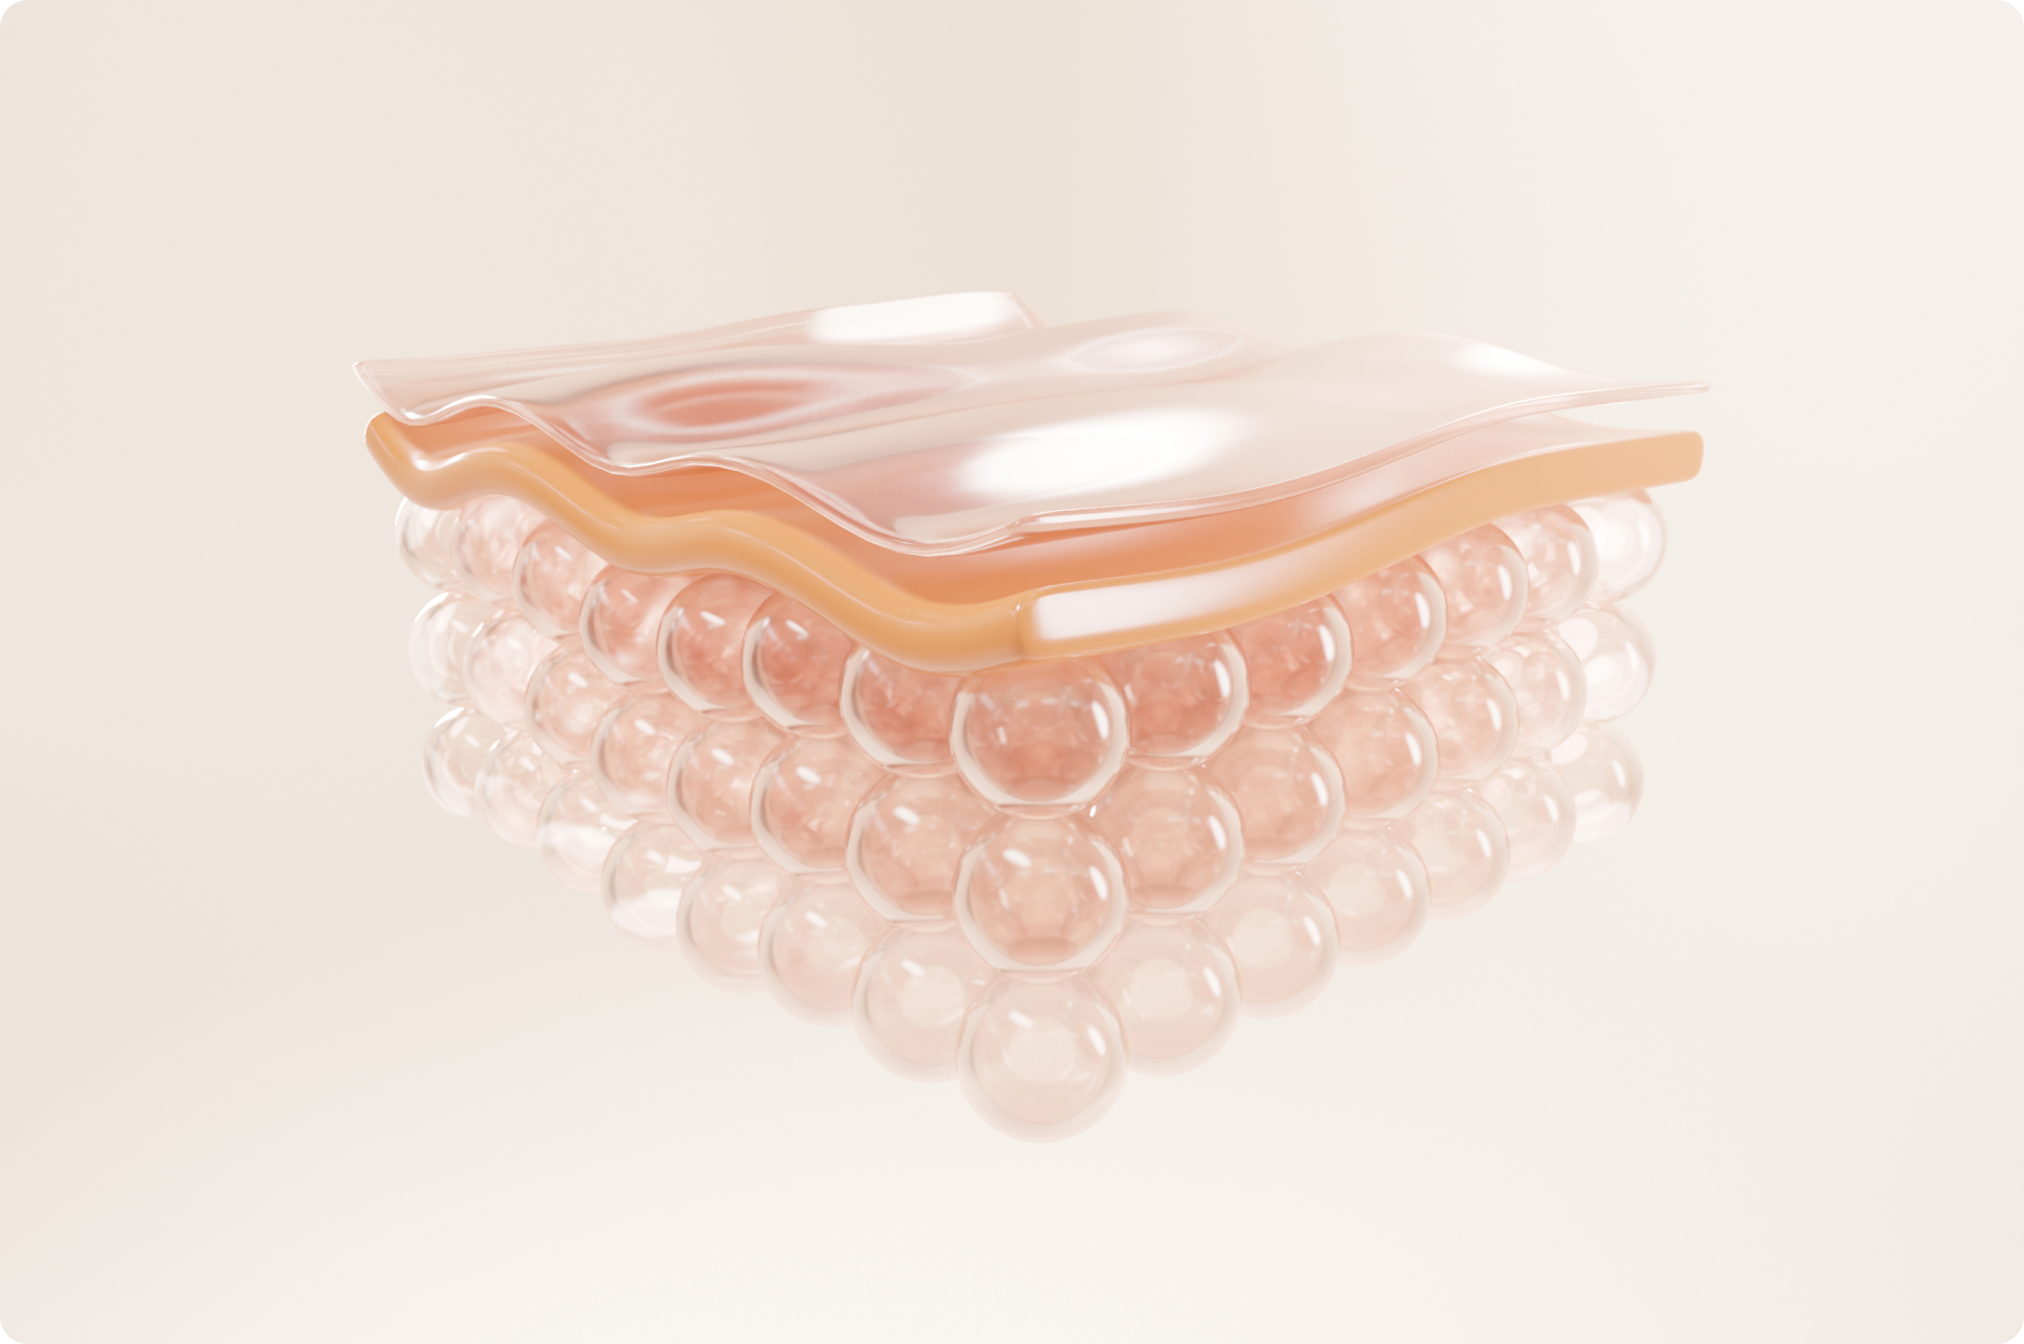 An abstract graphic representing the layers of skin, with 3 layers of clear bubbles, a more solid wavy layer above that, and a firmer clear layer on top.